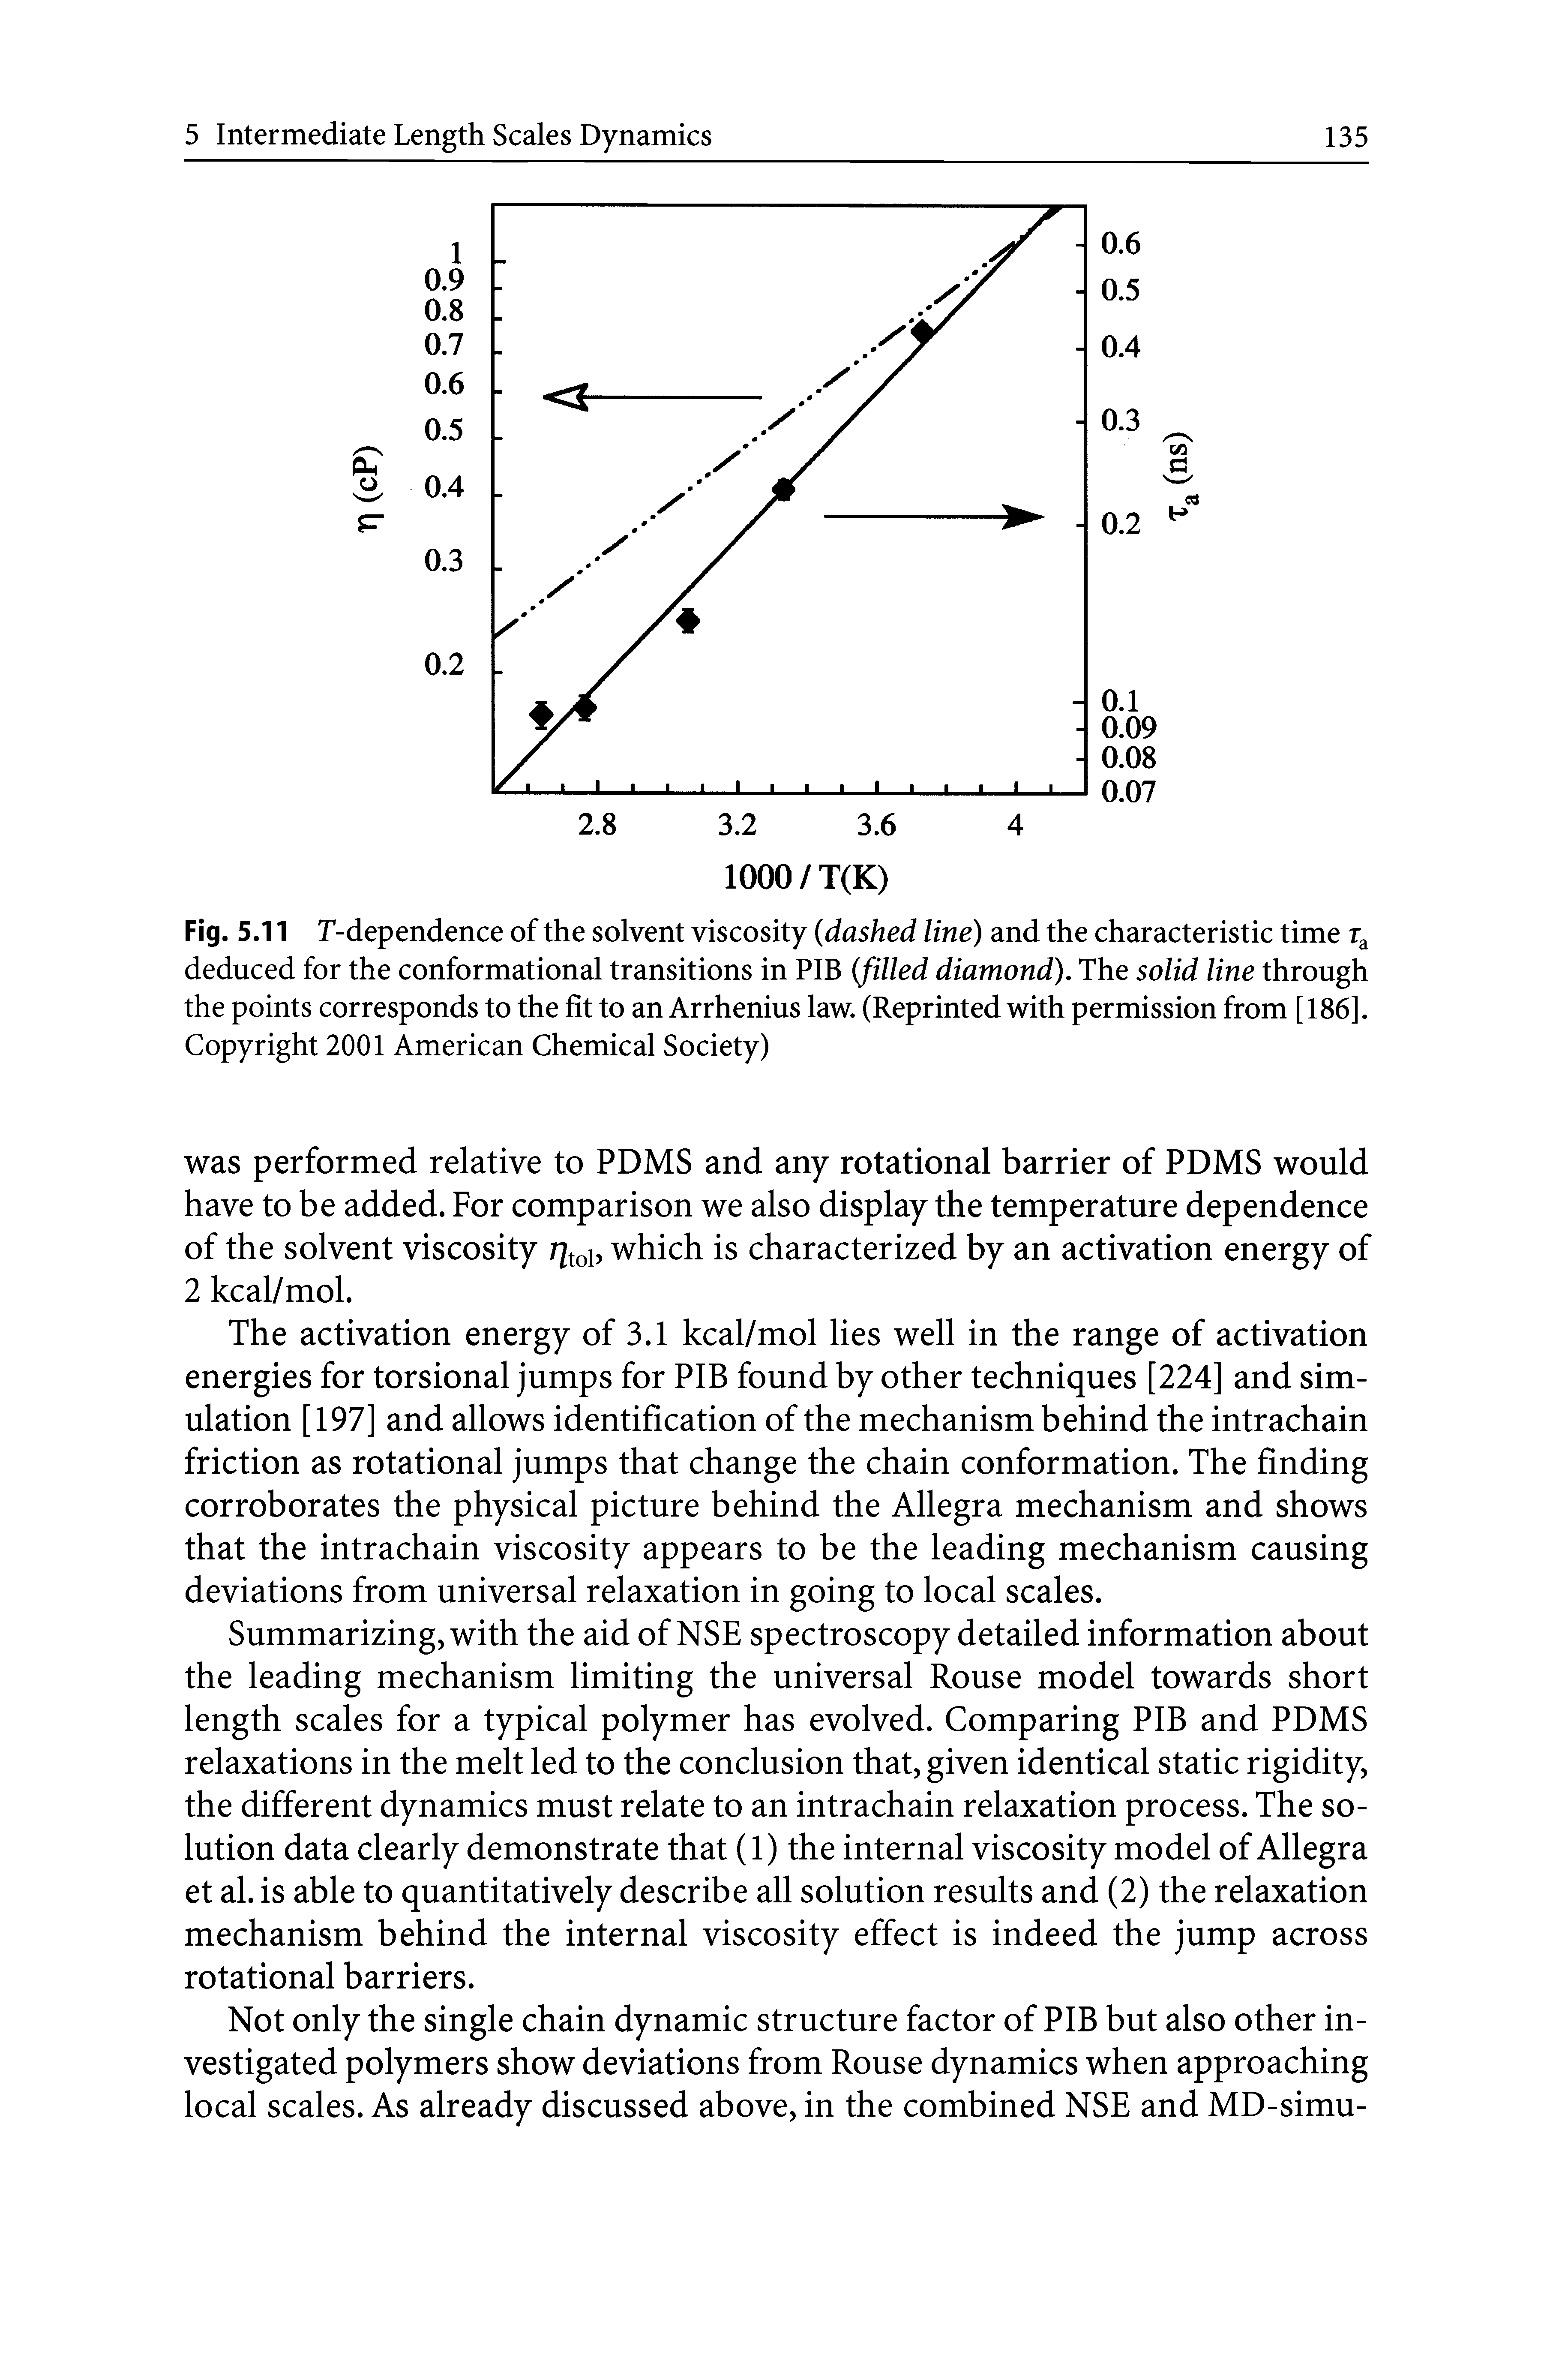 Fig. 5.11 T-dependence of the solvent viscosity (dashed line) and the characteristic time deduced for the conformational transitions in PIB (filled diamond). The solid line through the points corresponds to the fit to an Arrhenius law. (Reprinted with permission from [186]. Copyright 2001 American Chemical Society)...